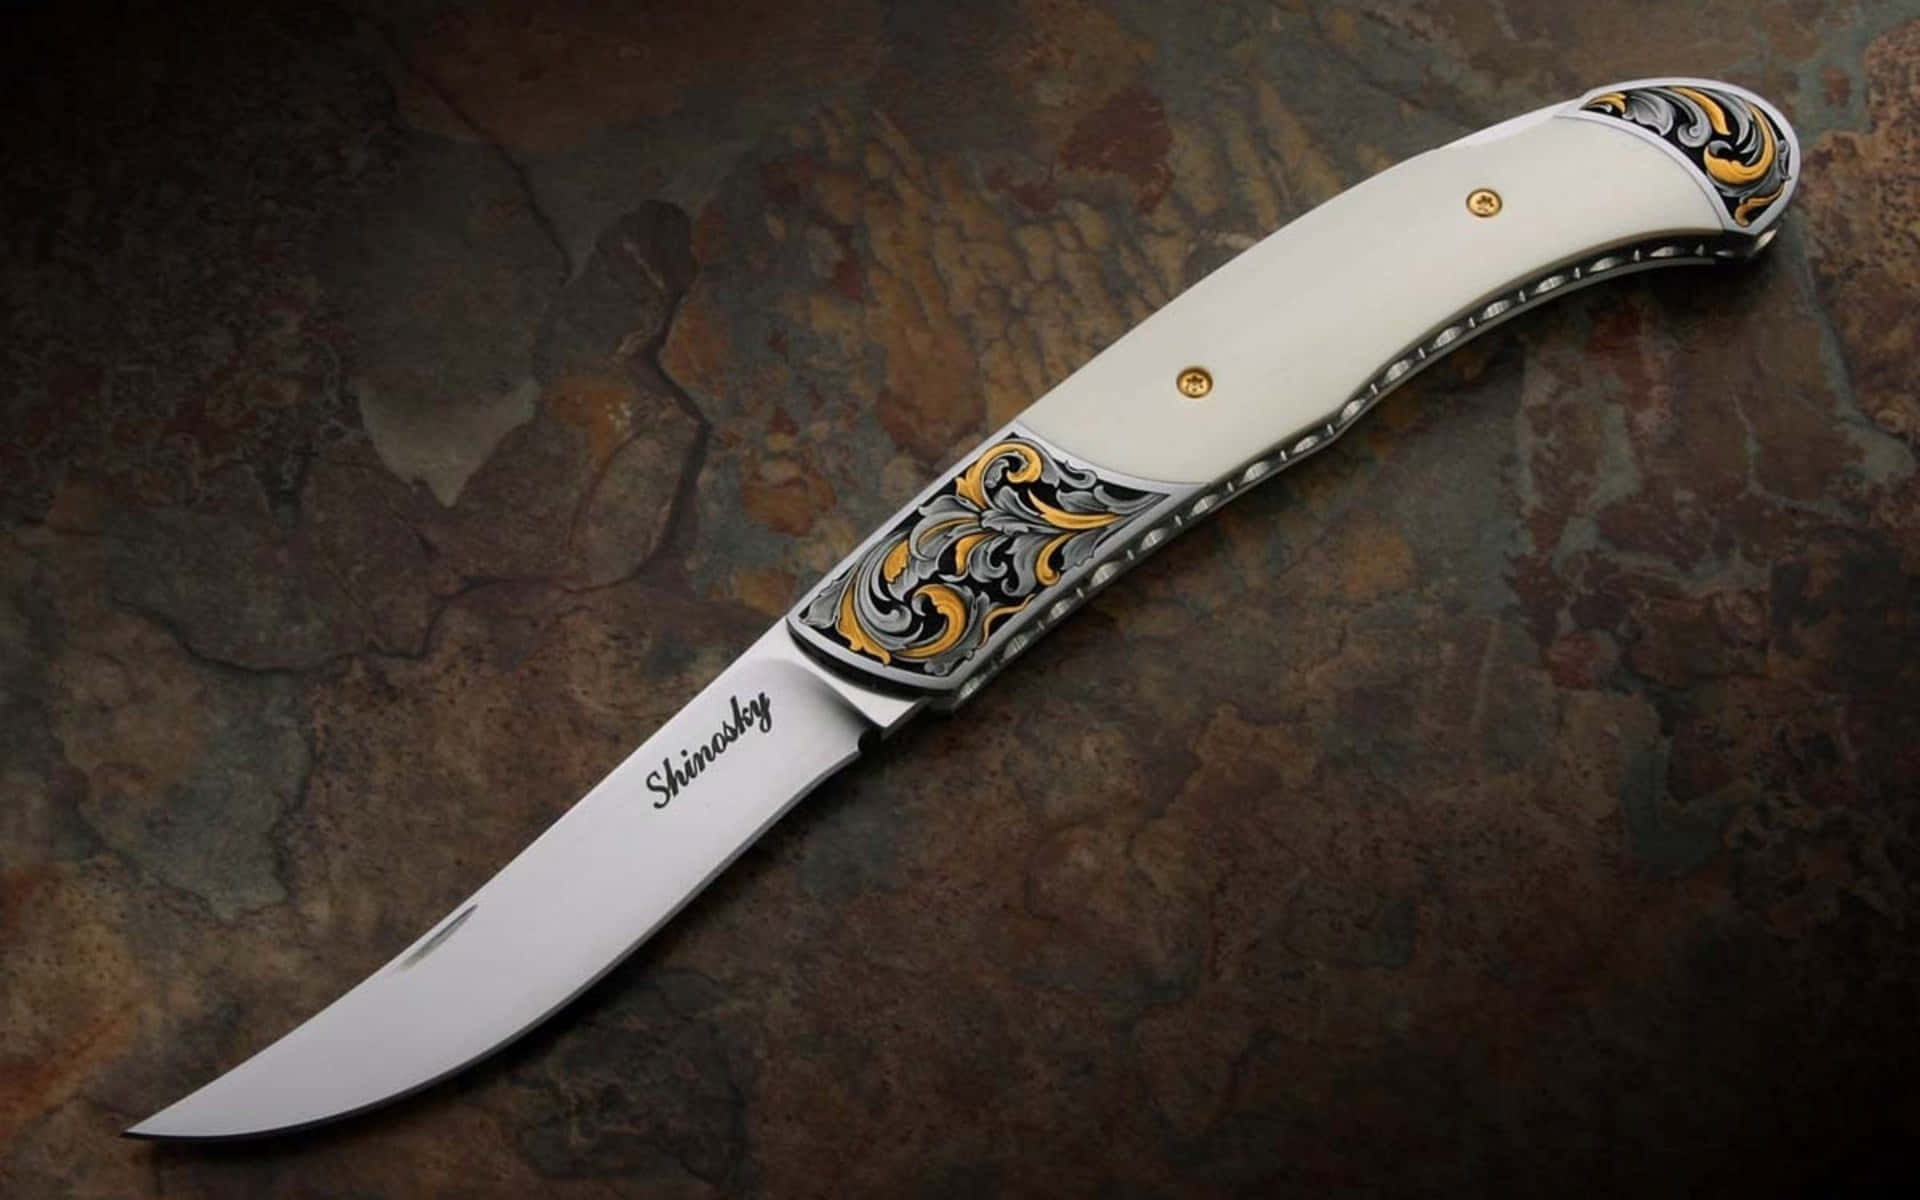 A Knife With A White Handle And Gold Accents